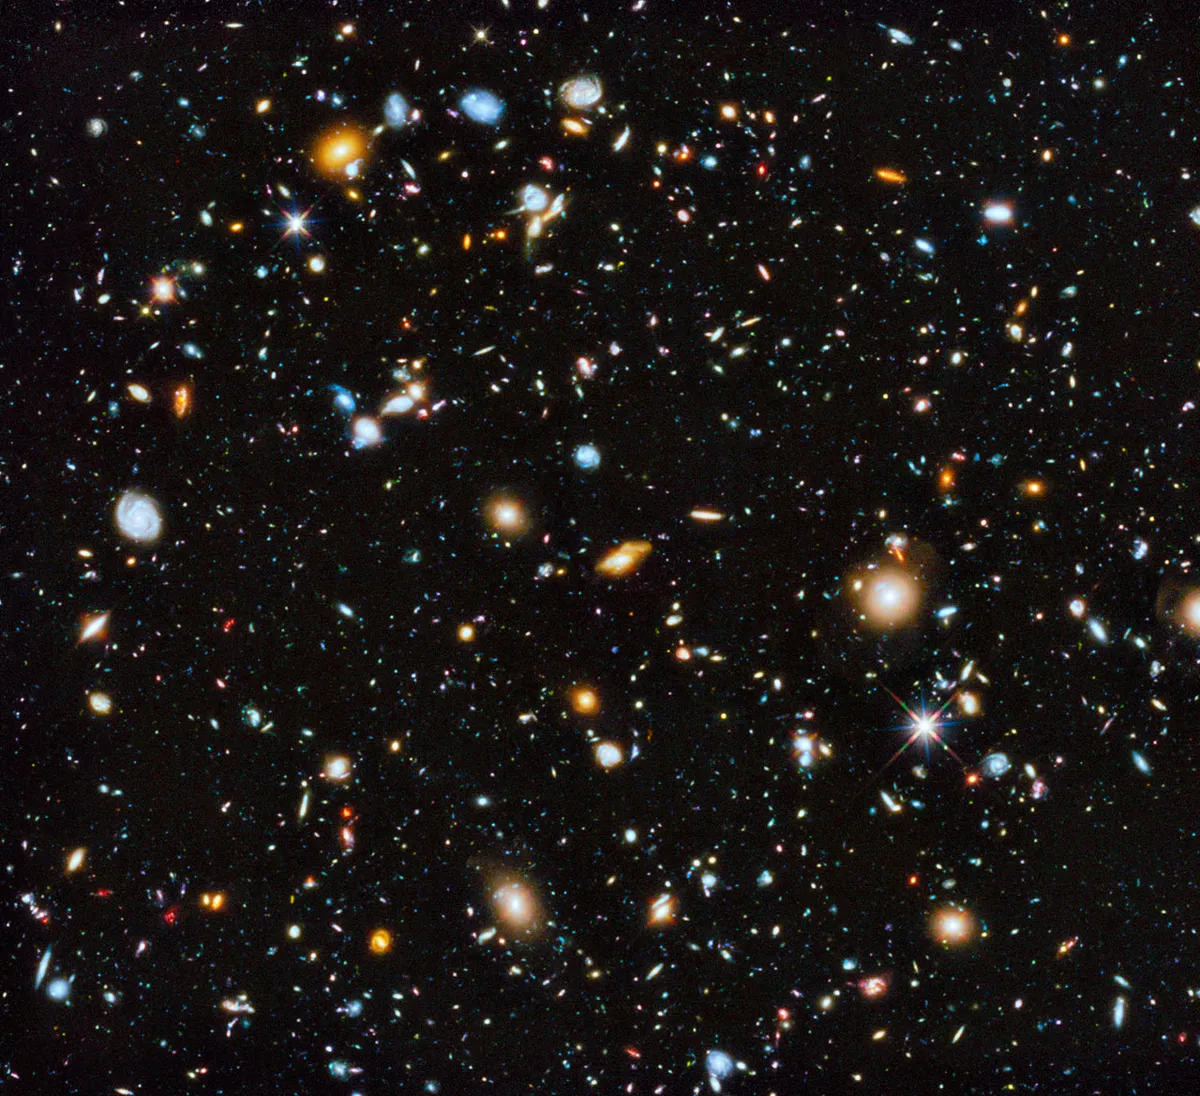 Hubble Ultra-Deep Field 3, June 2014. Virtually every point of light in this image is a galaxy, each composed of billions of stars. Credit: NASA, ESA, H. Teplitz and M. Rafelski (IPAC/Caltech), A. Koekemoer (STScI), R. Windhorst (Arizona State University), Z. Levay (STScI)